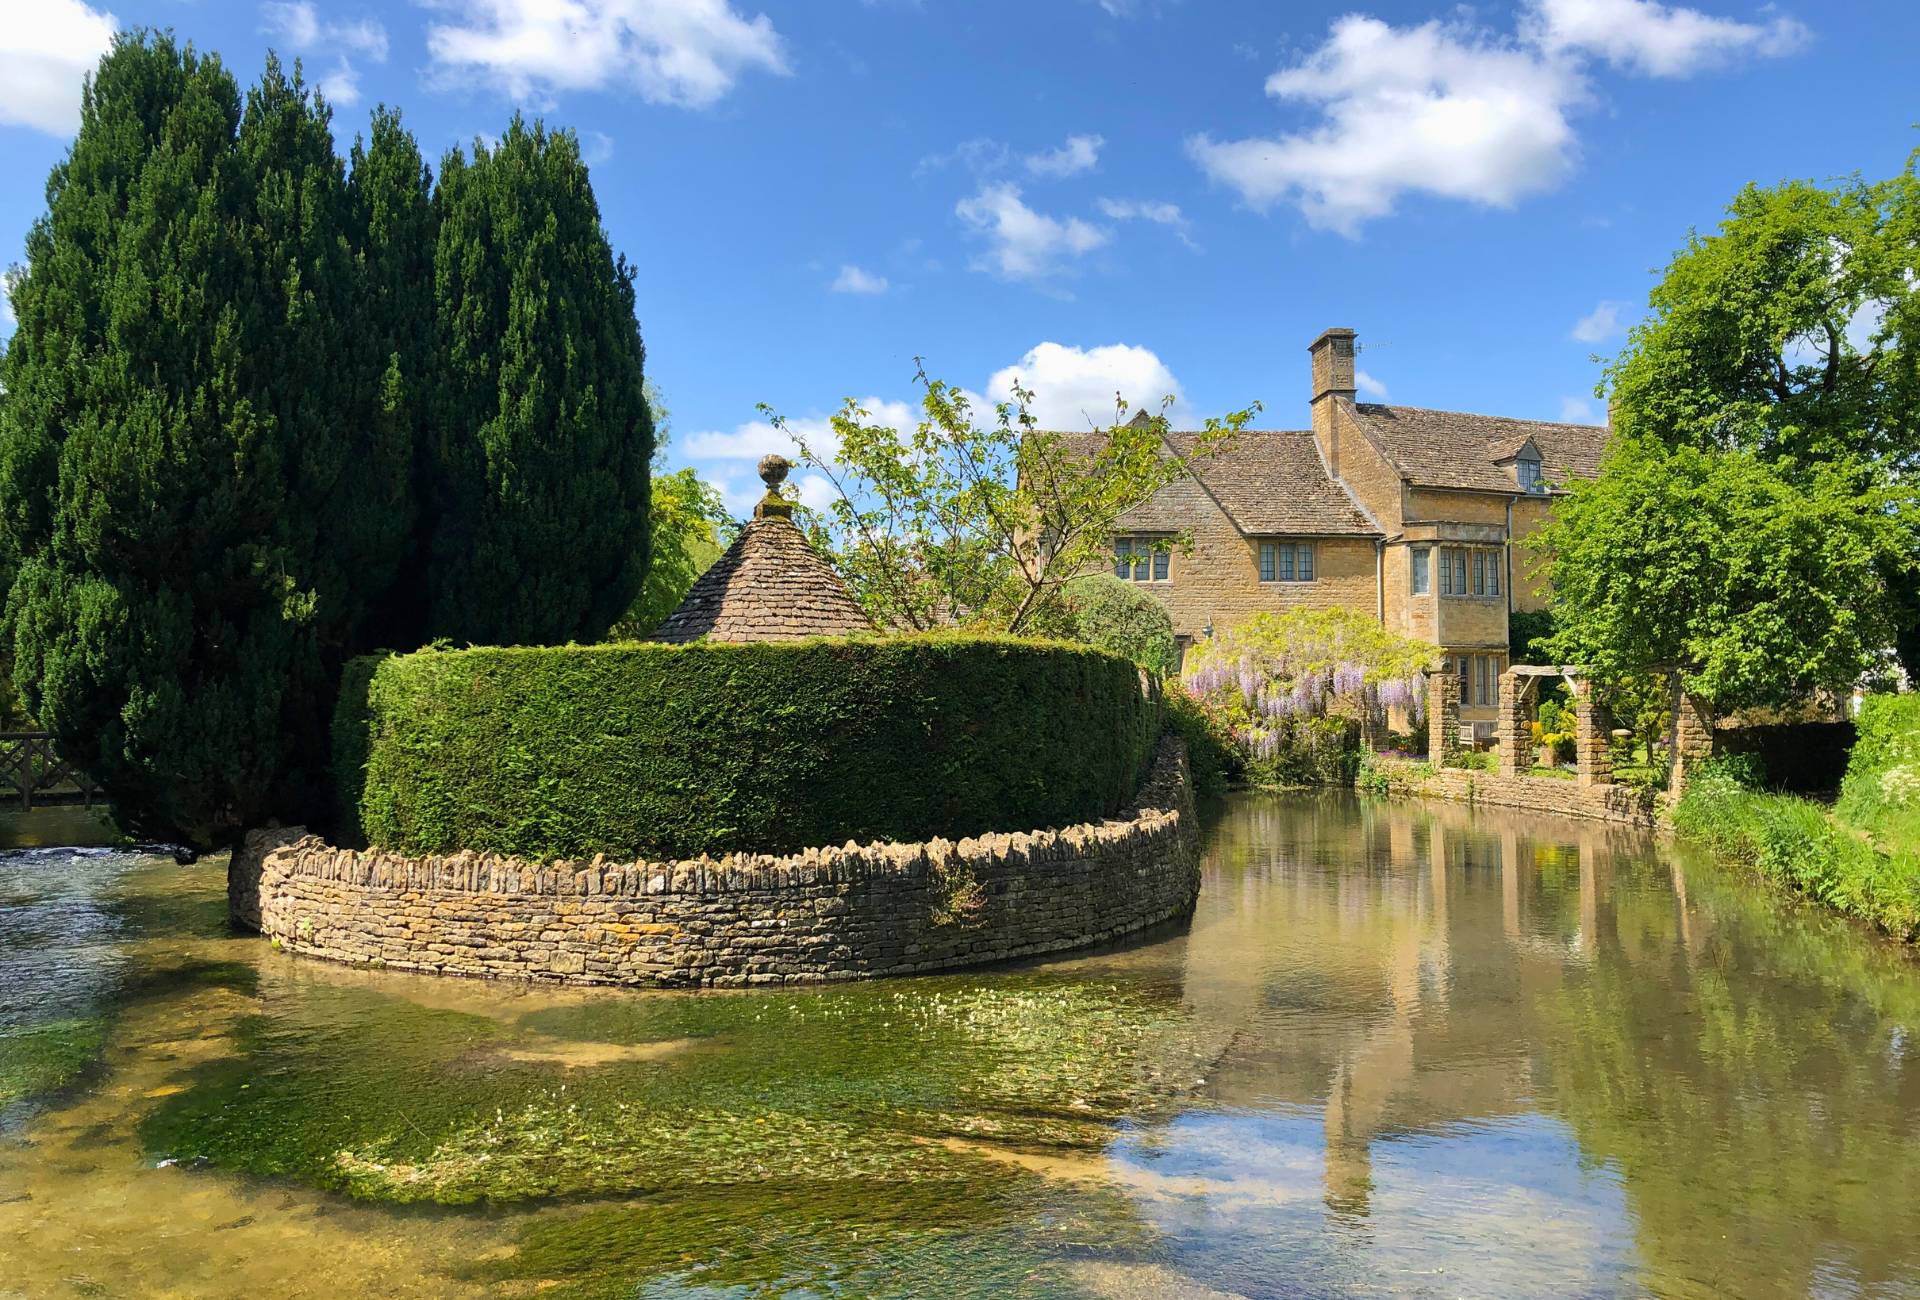 Large house by a pond in Bourton on the Water.